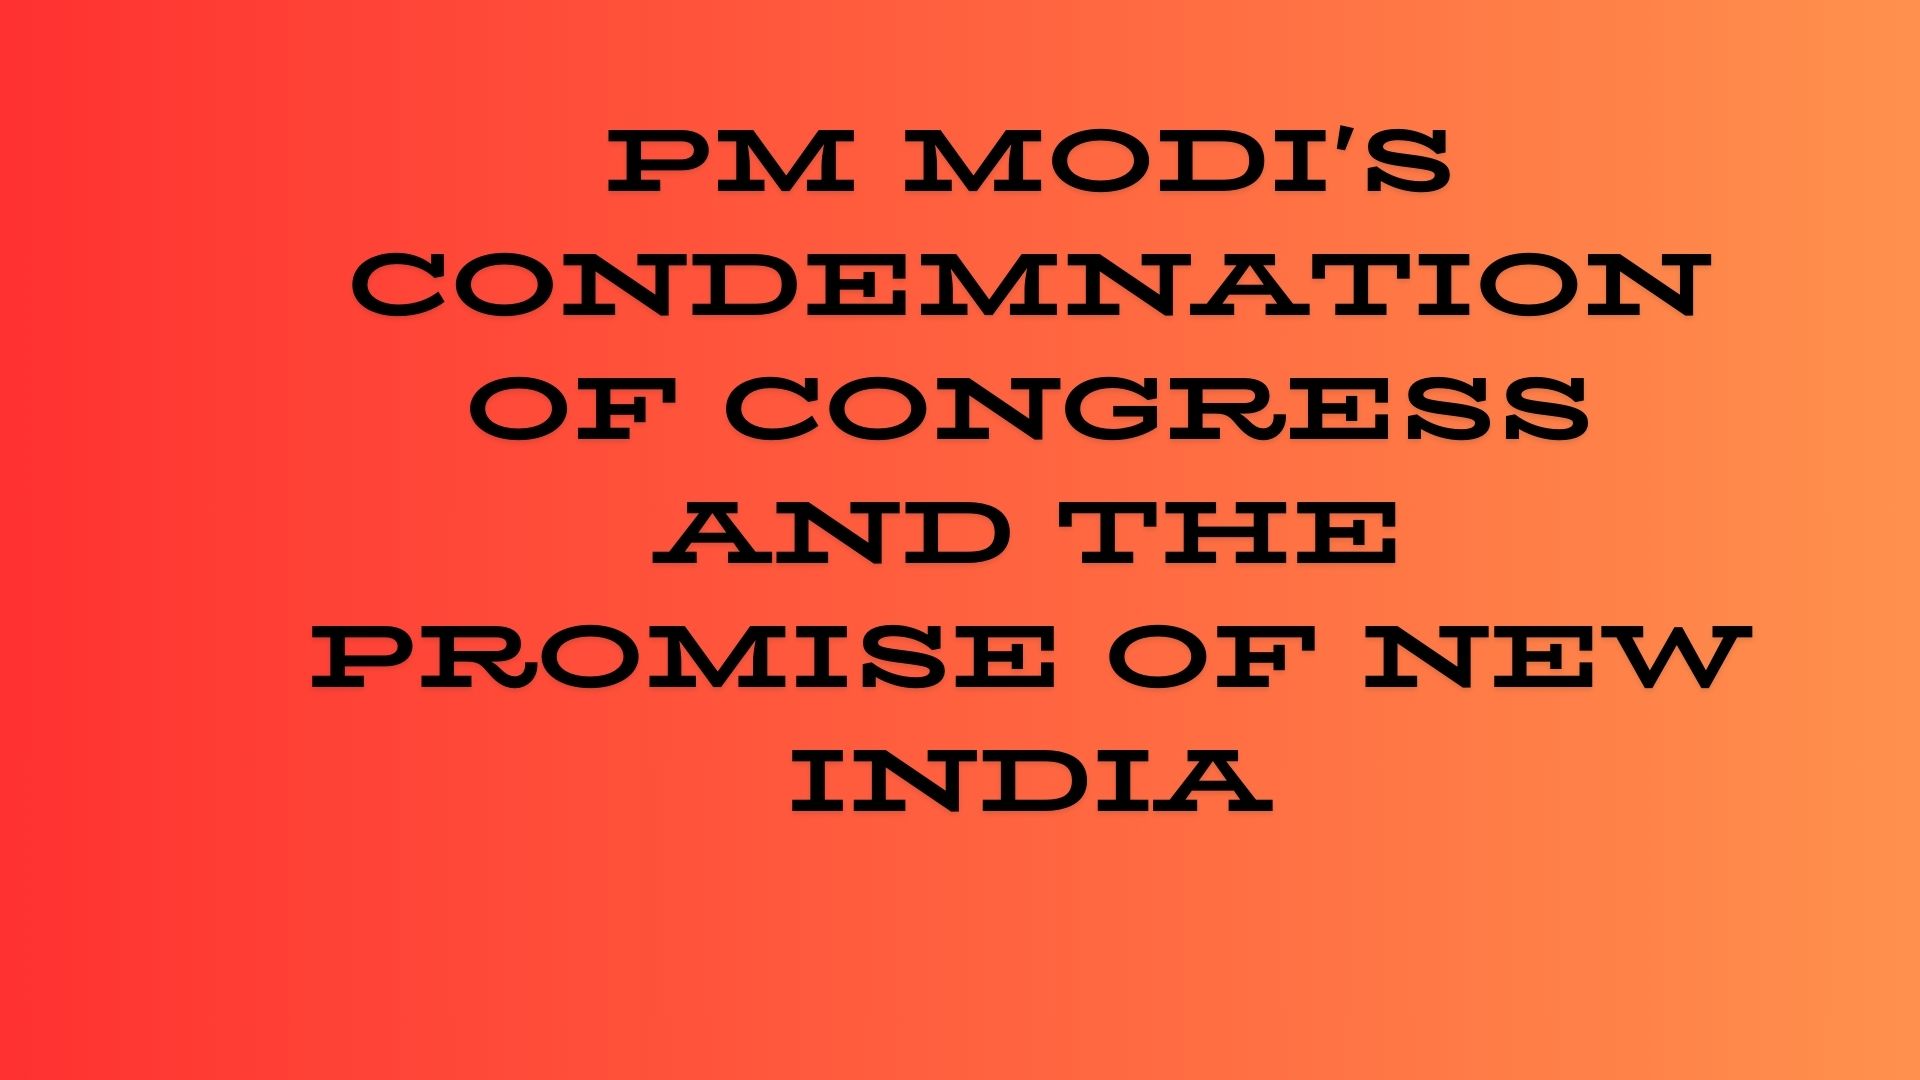 PM Modi's Condemnation of Congress and the Promise of New India